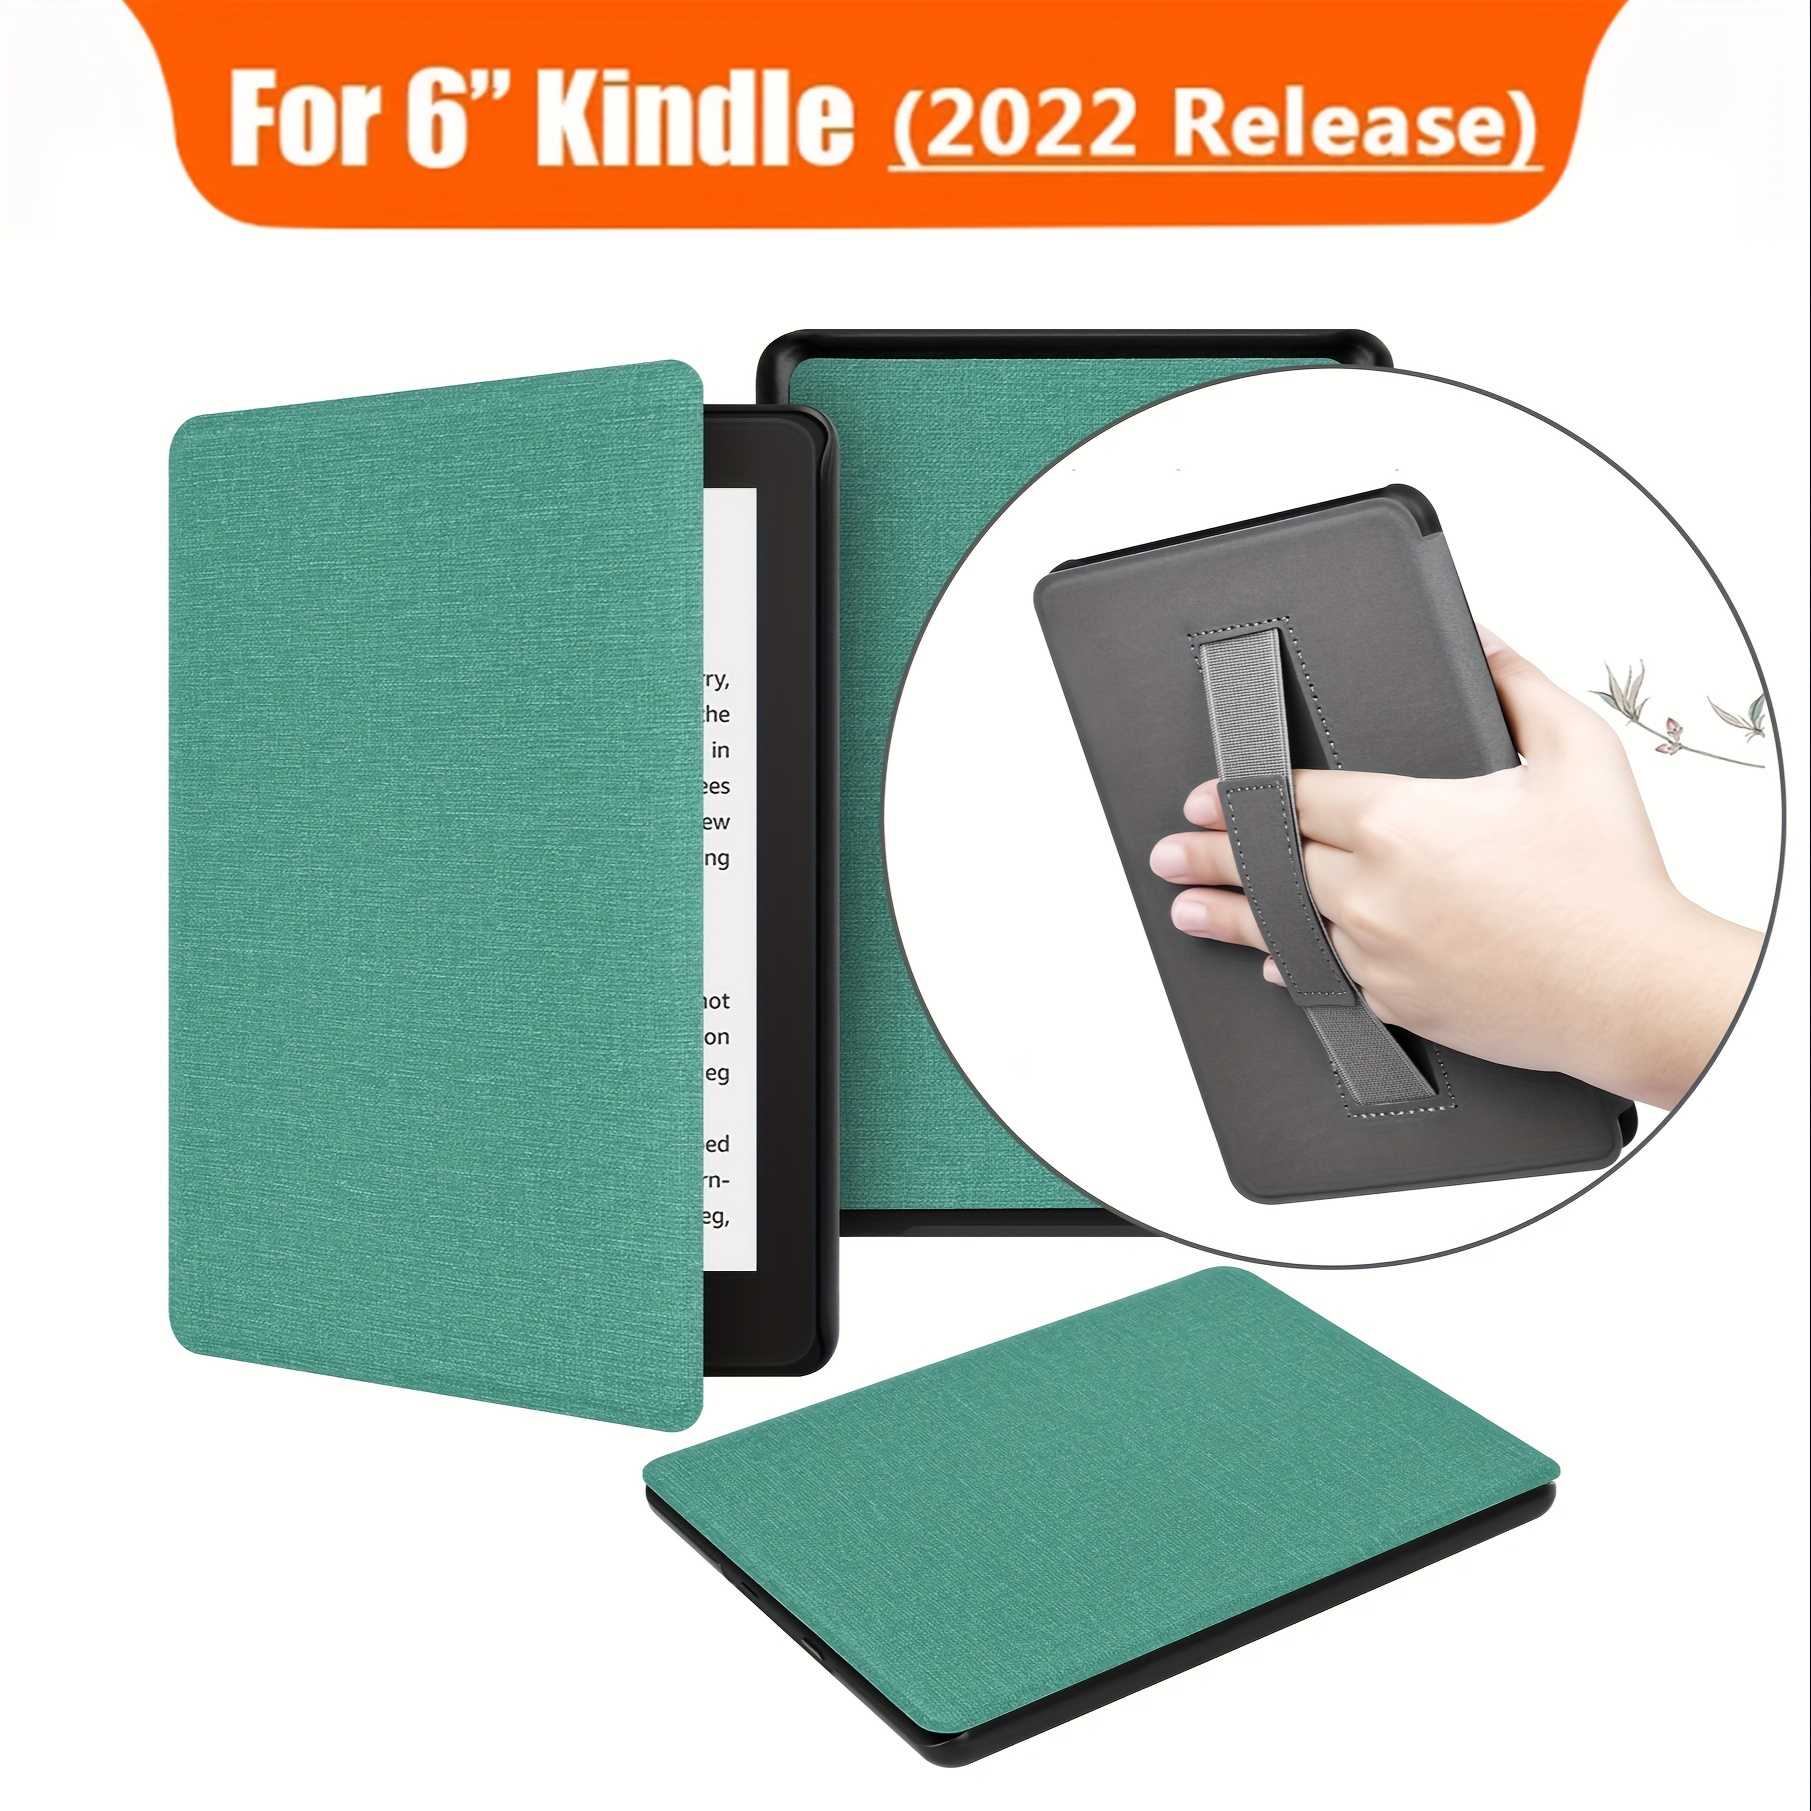 

Fabric Cover For 6" All-new Kindle (11th Generation-2022 Release), Hand Strap Designed, Magnetic Case With Auto Wake/sleep For Kindle 2022 11th Gen E-reader (model No. C2v2l3 )